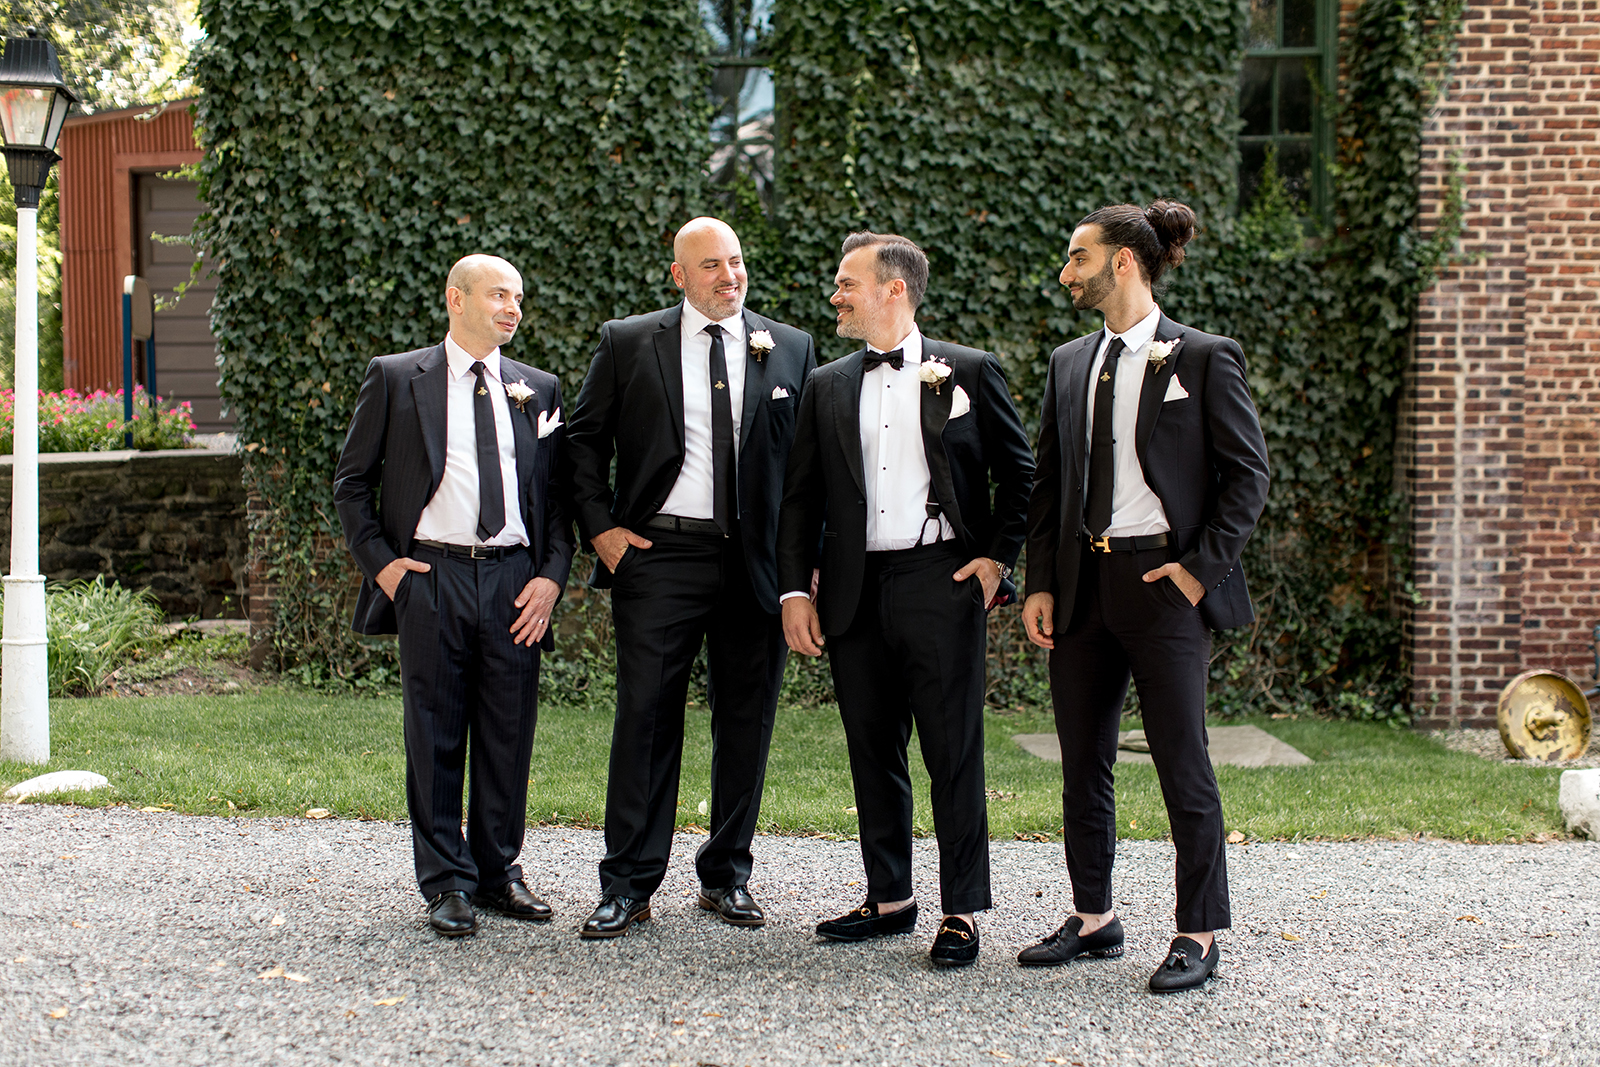 groom and his groomsmen in classic black tuxes